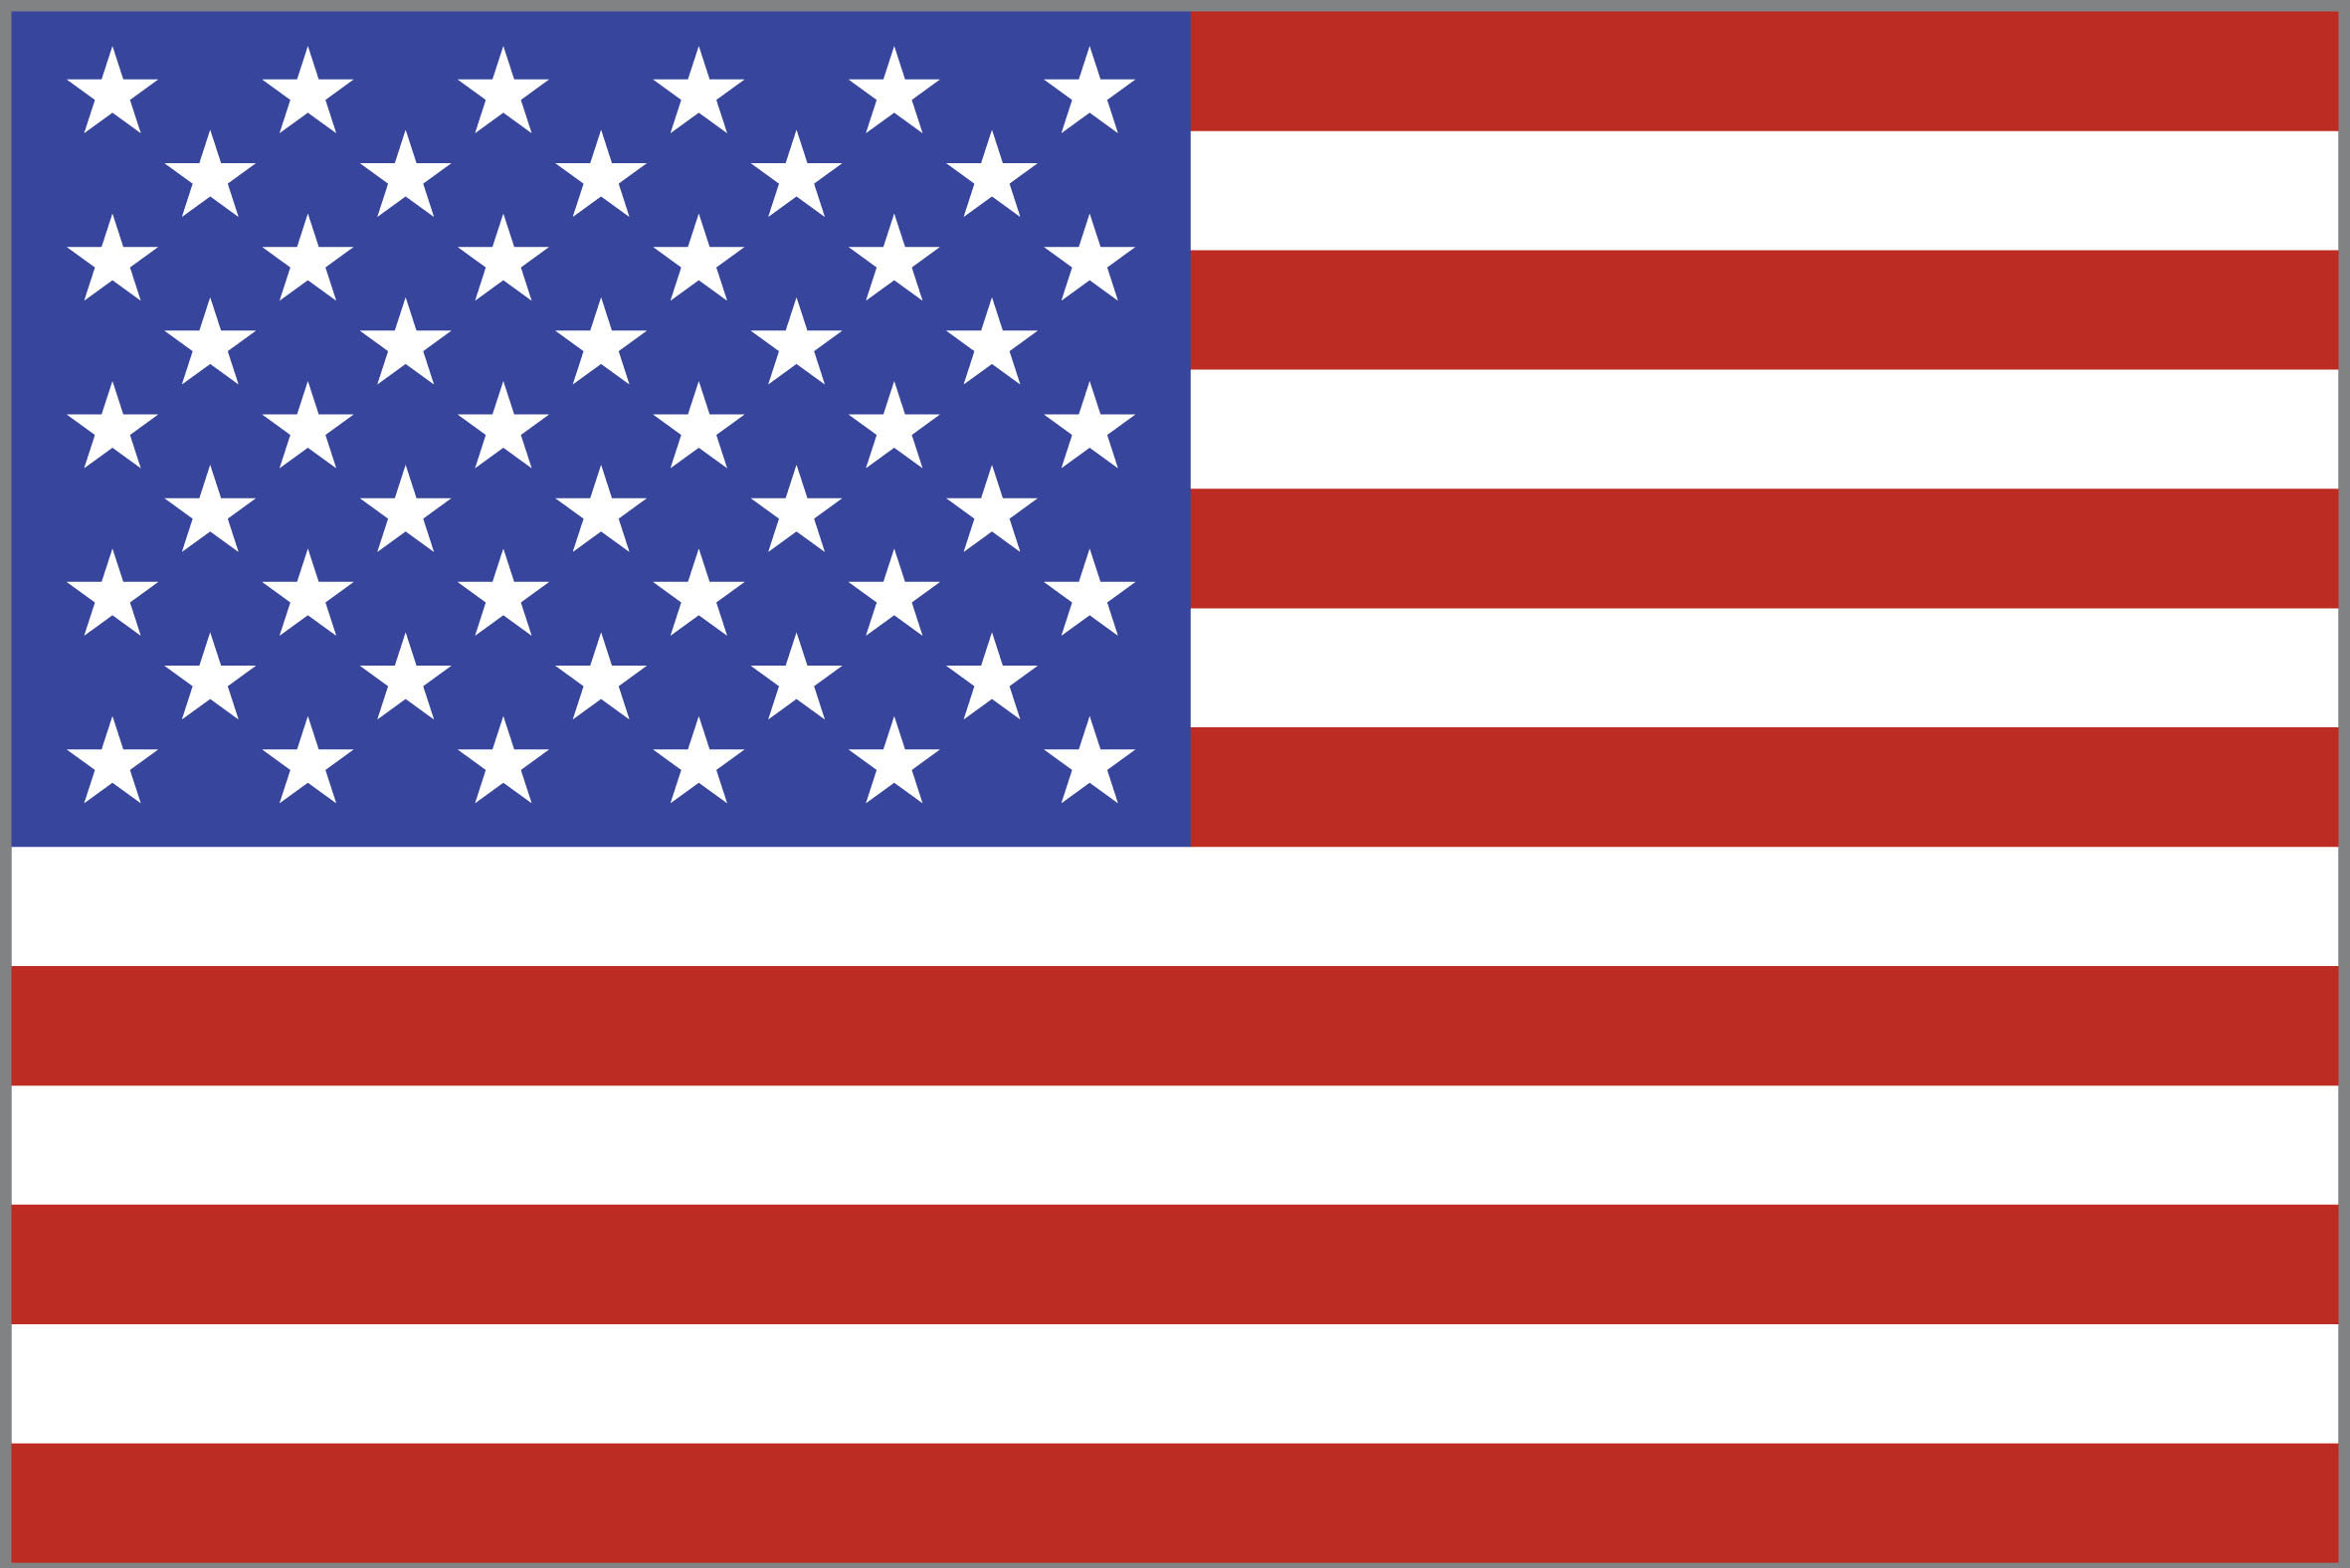 The flag of the United States. (Credit: Getty Images)